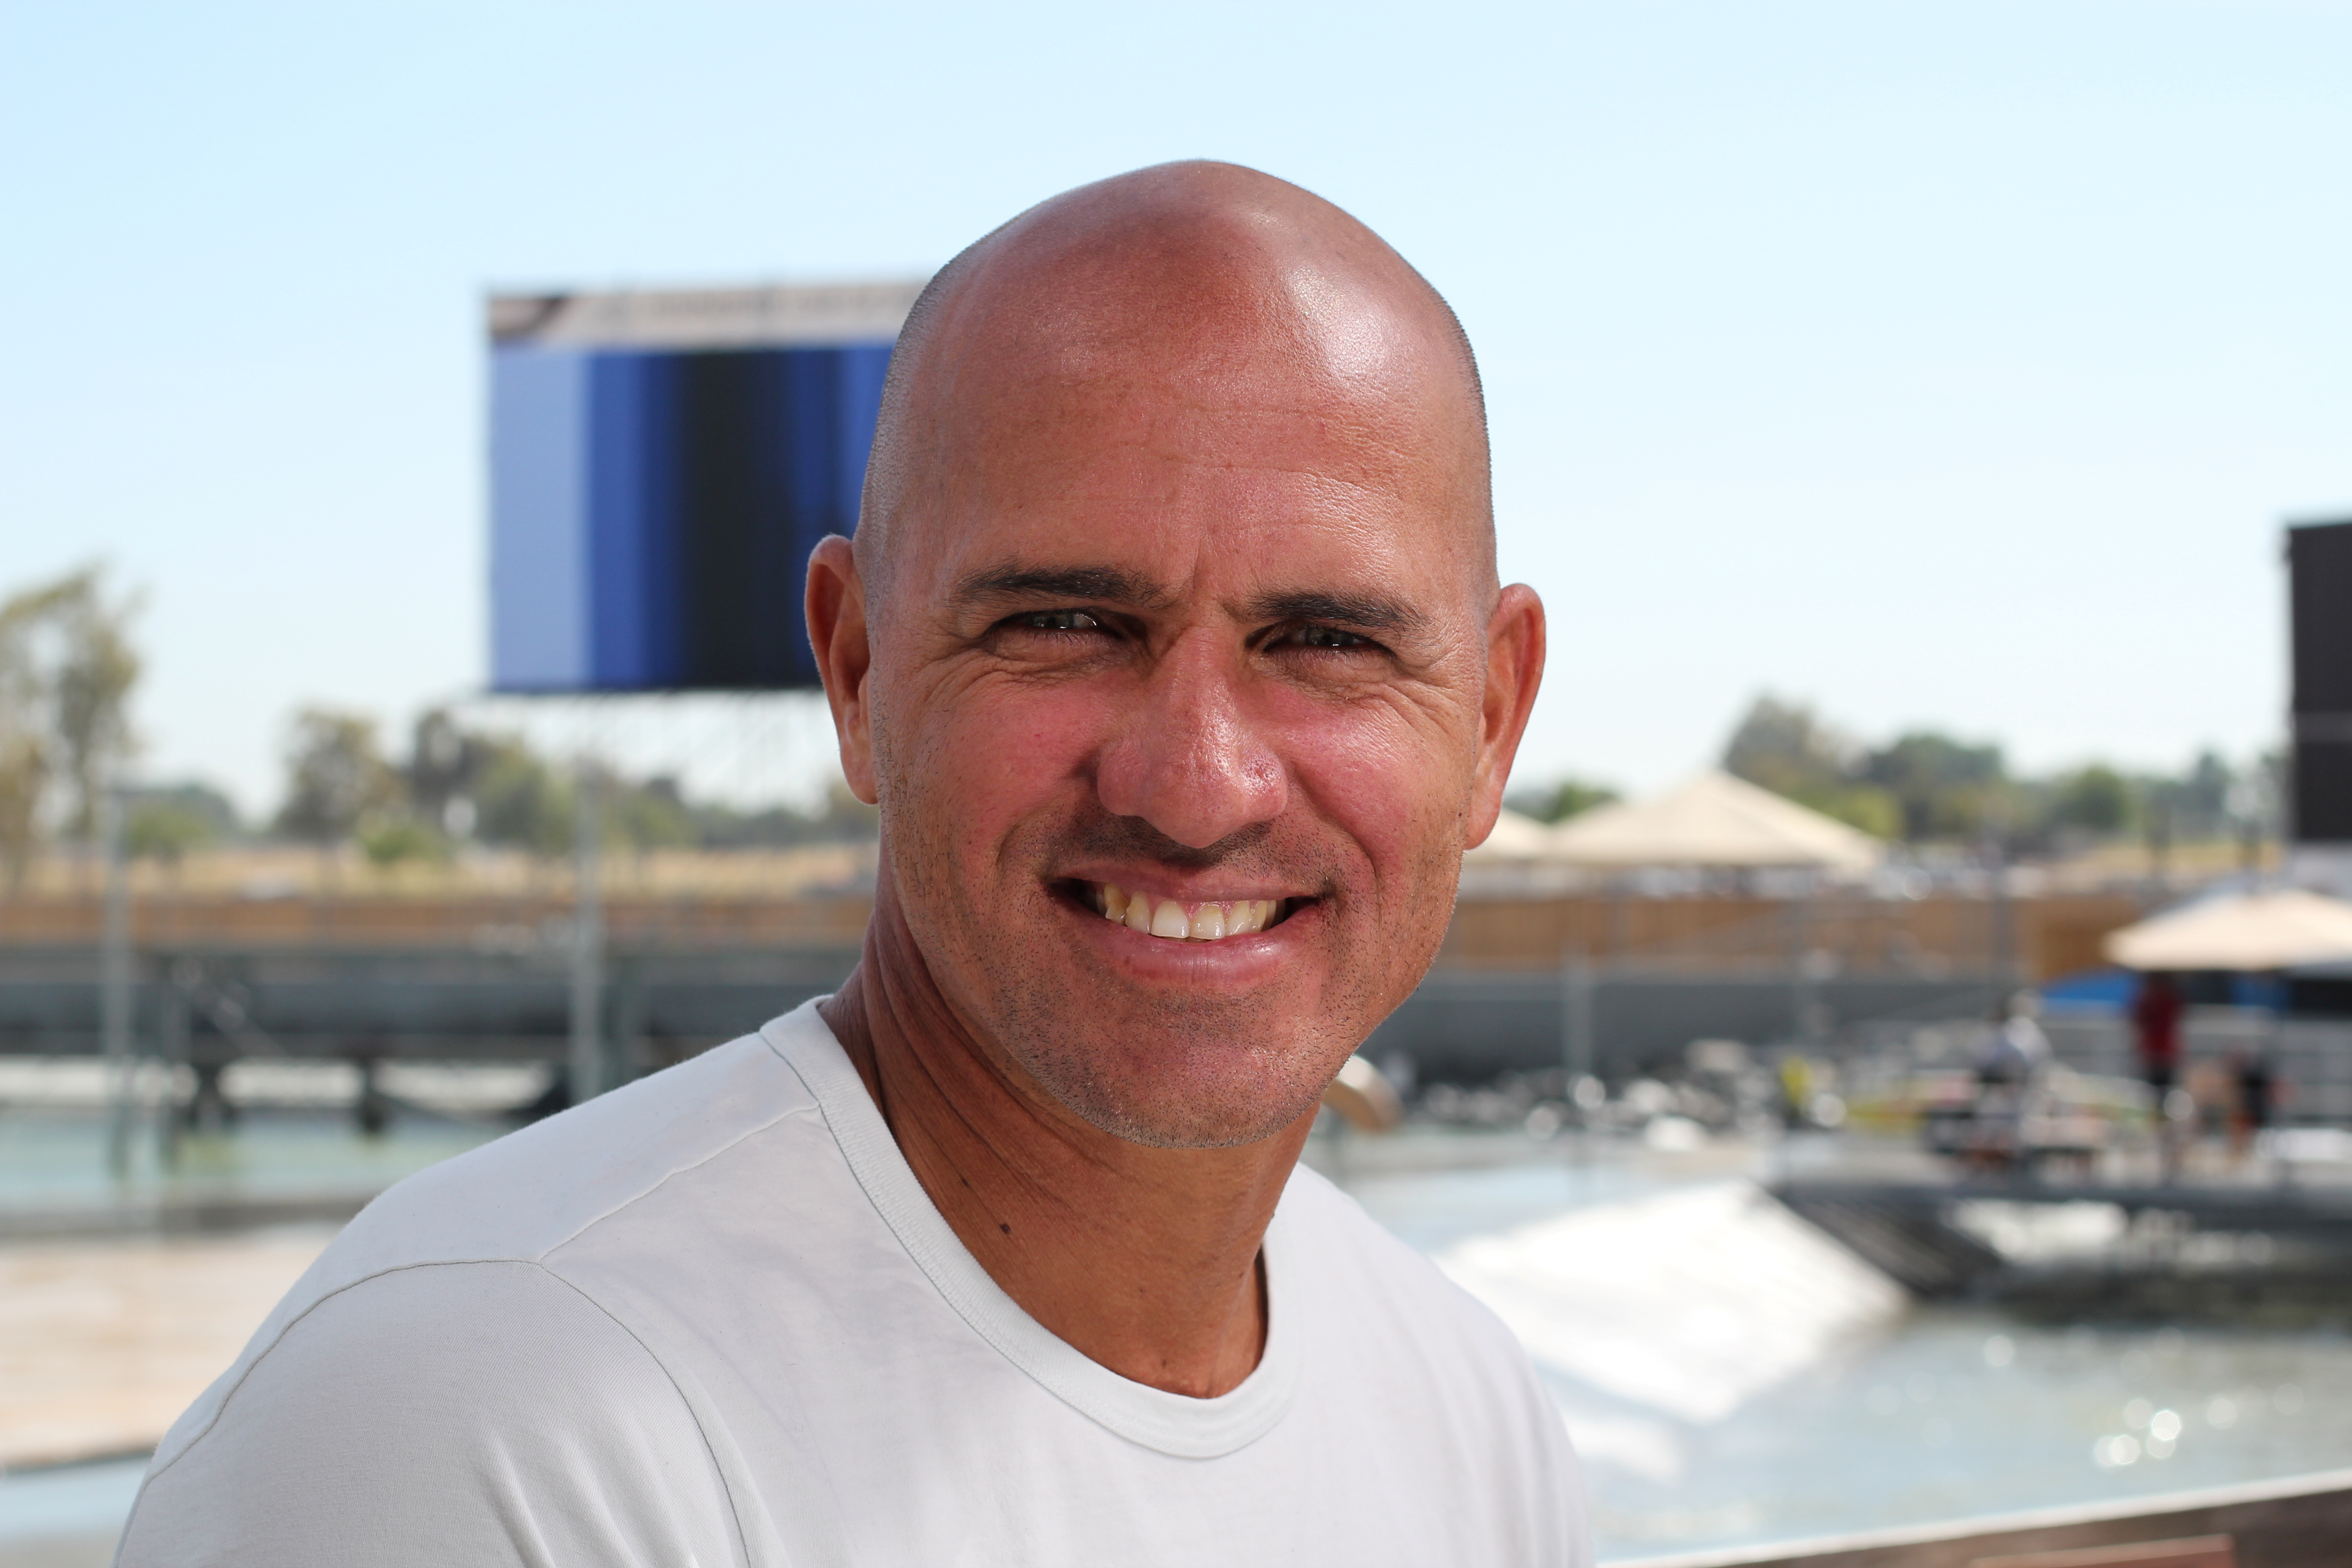 Surfer Kelly Slater at World Surf League Surf Ranch in Lemoore